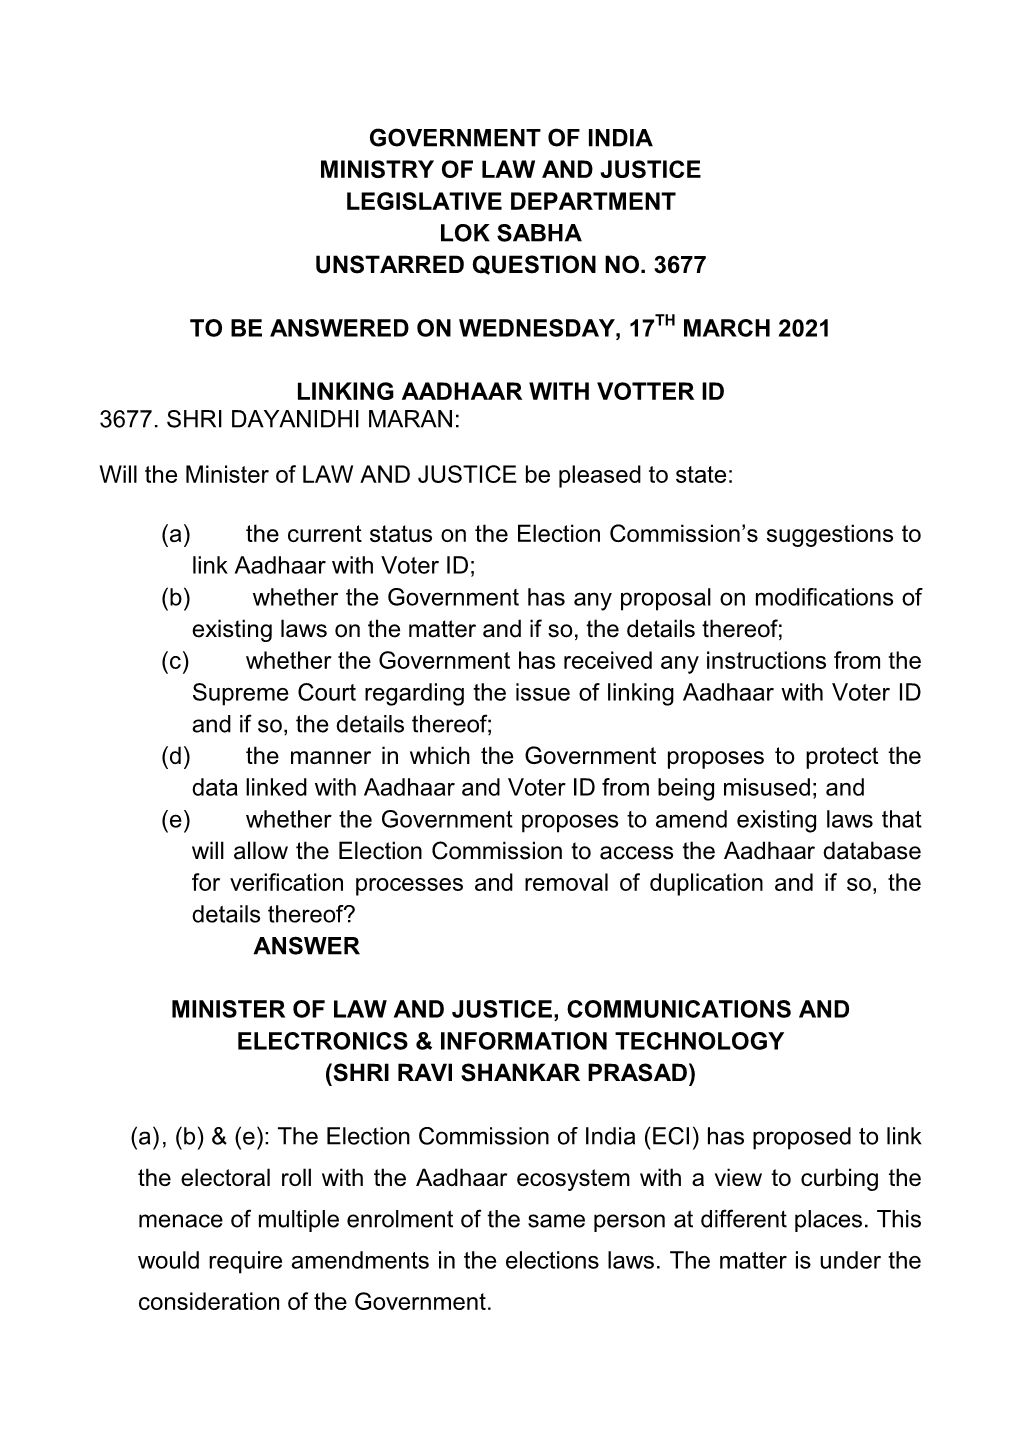 Government of India Ministry of Law and Justice Legislative Department Lok Sabha Unstarred Question No